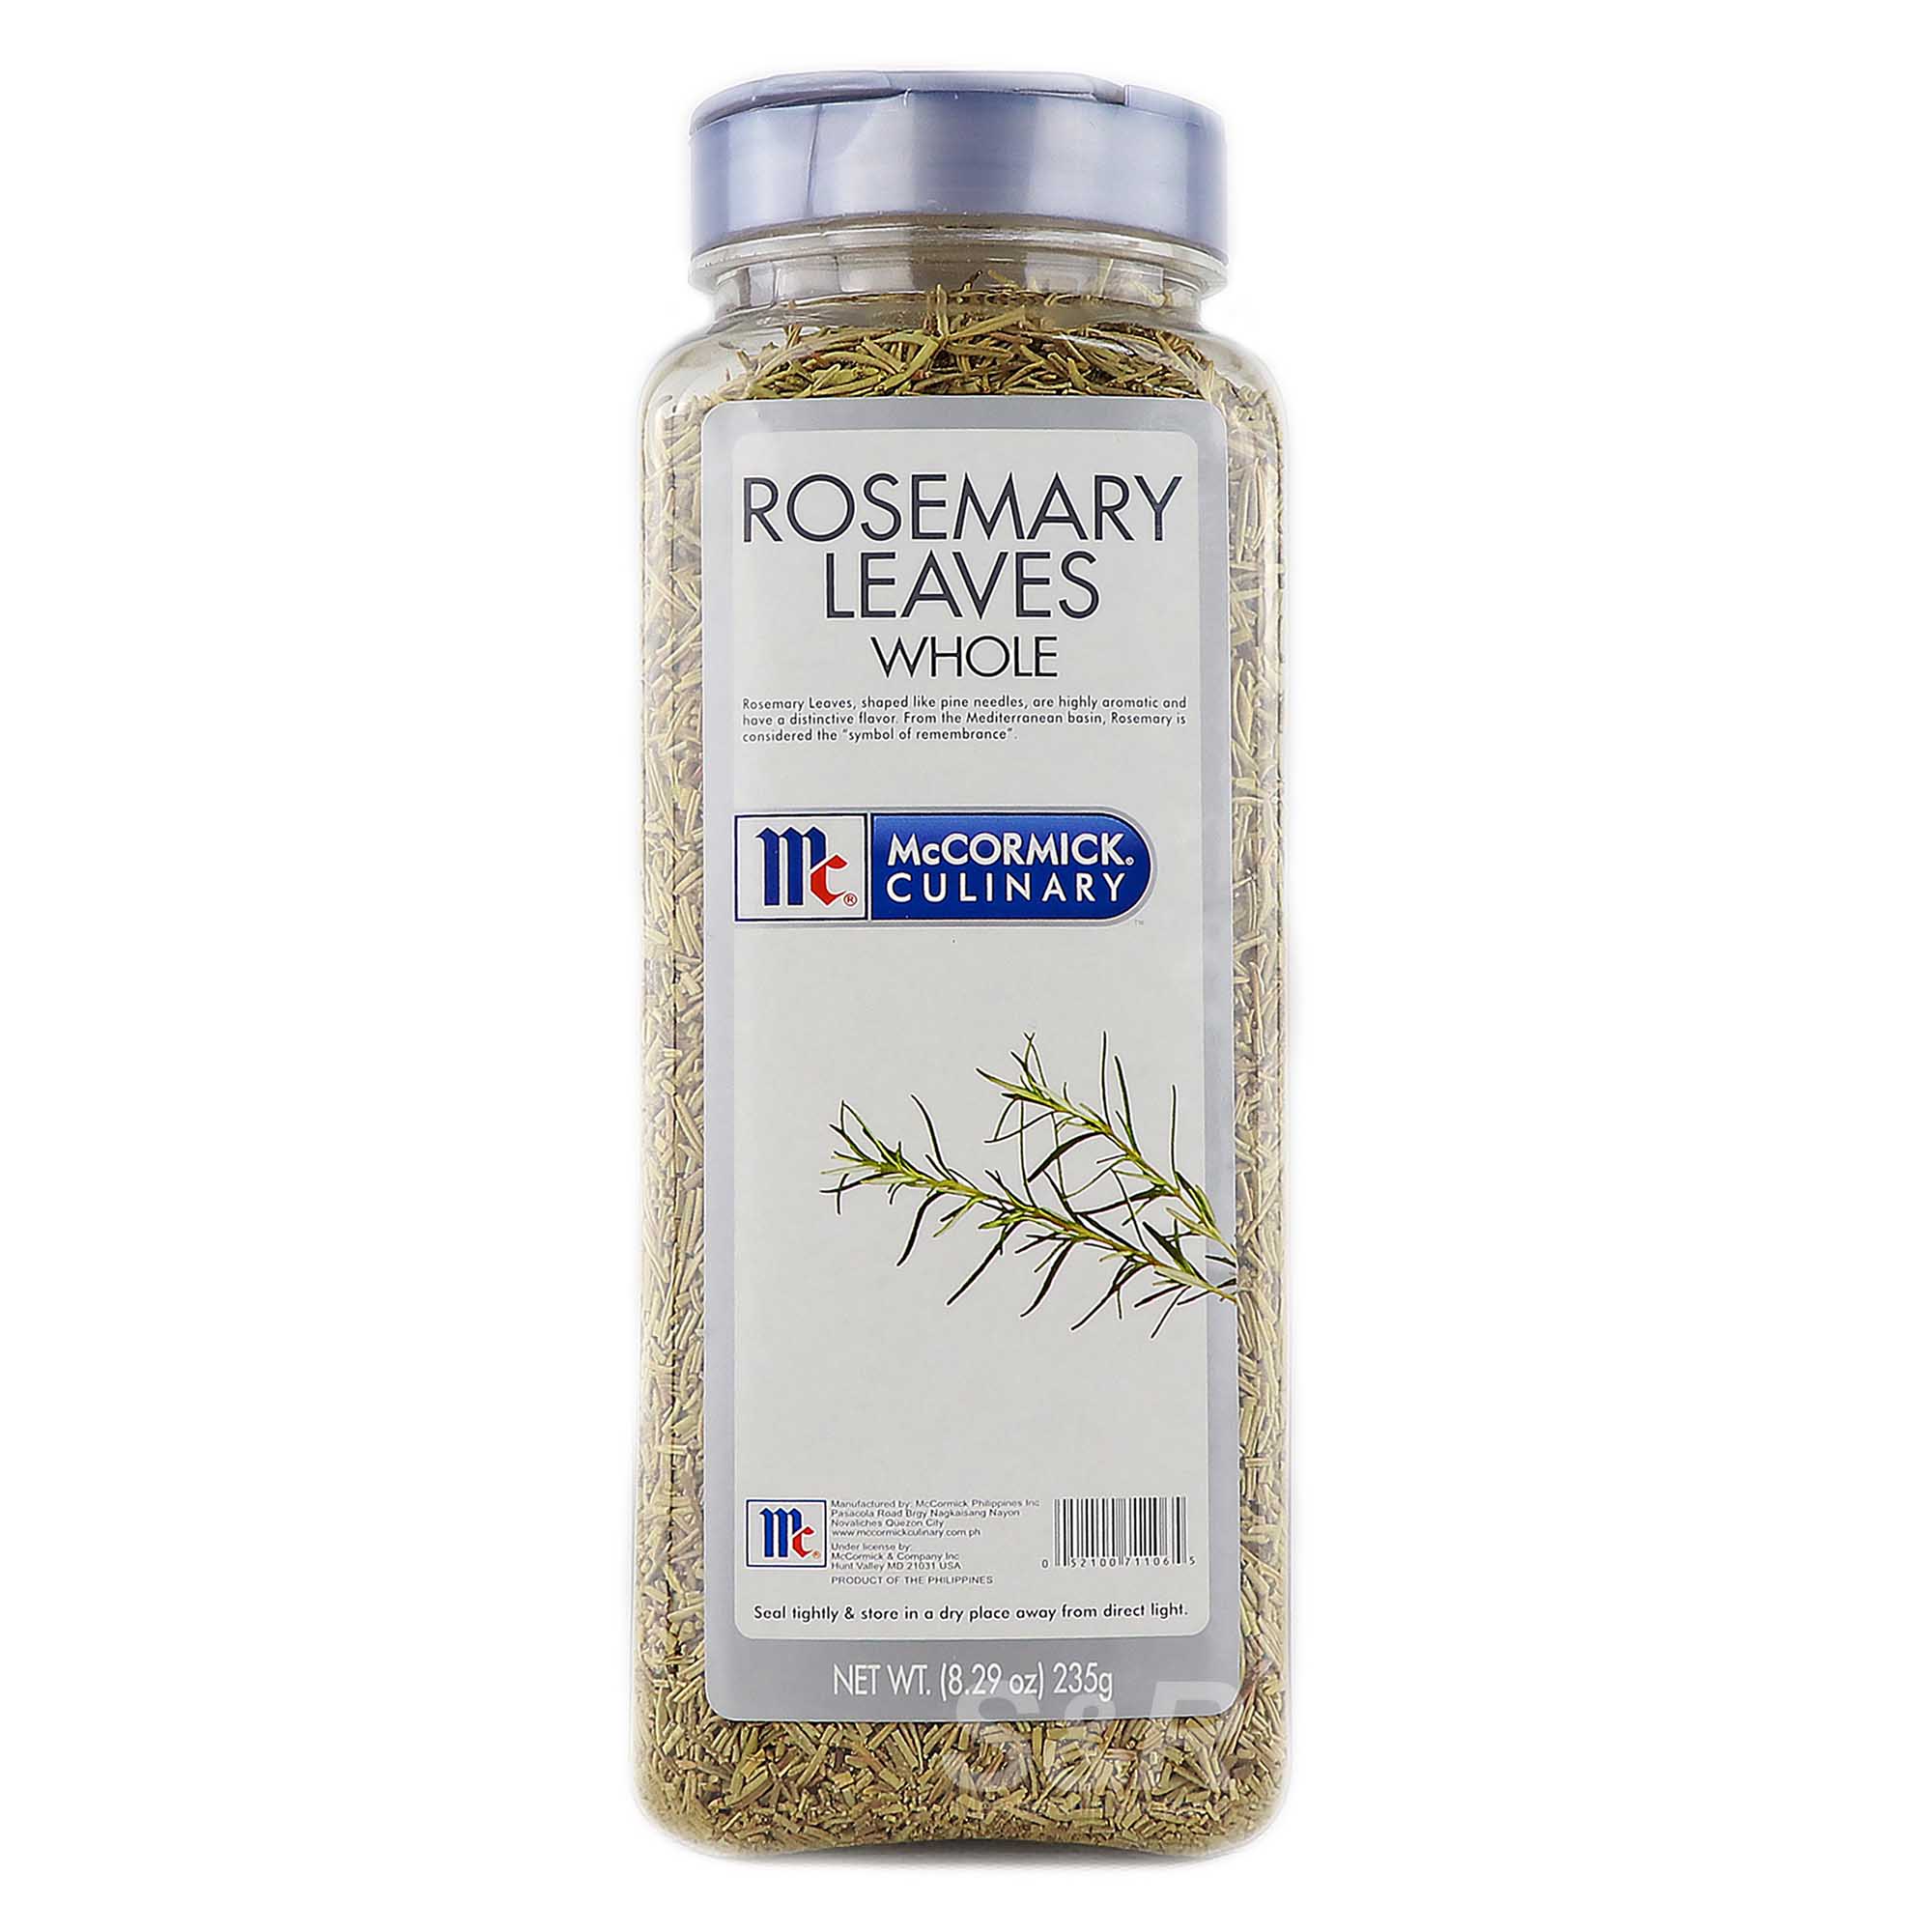 McCormick Culinary Rosemary Leaves Whole 235g